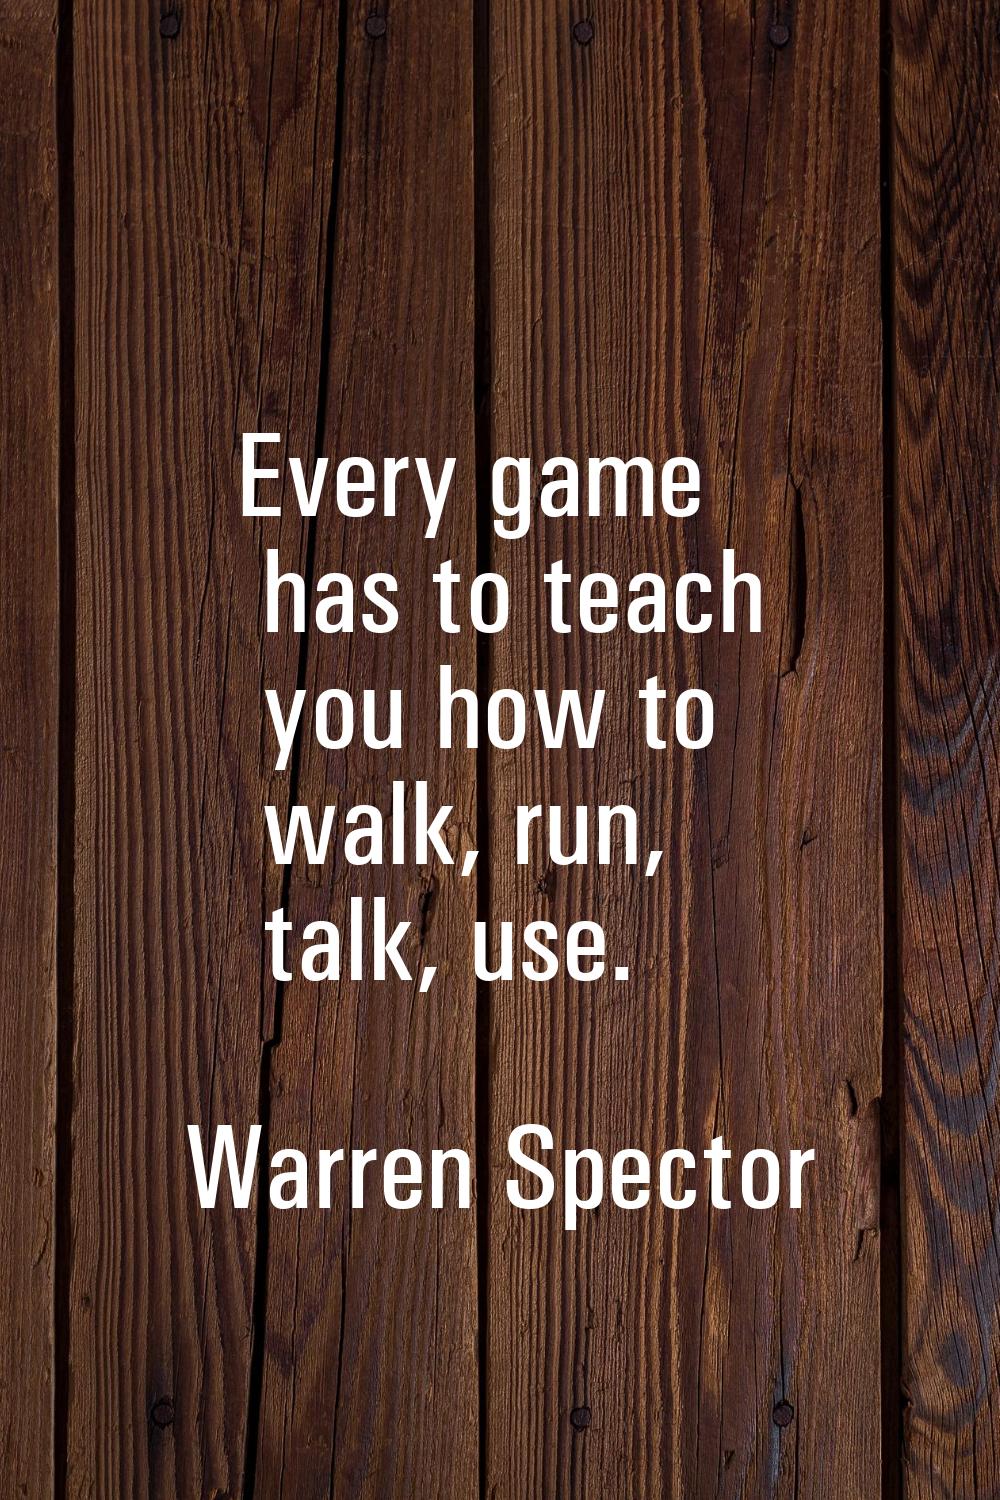 Every game has to teach you how to walk, run, talk, use.